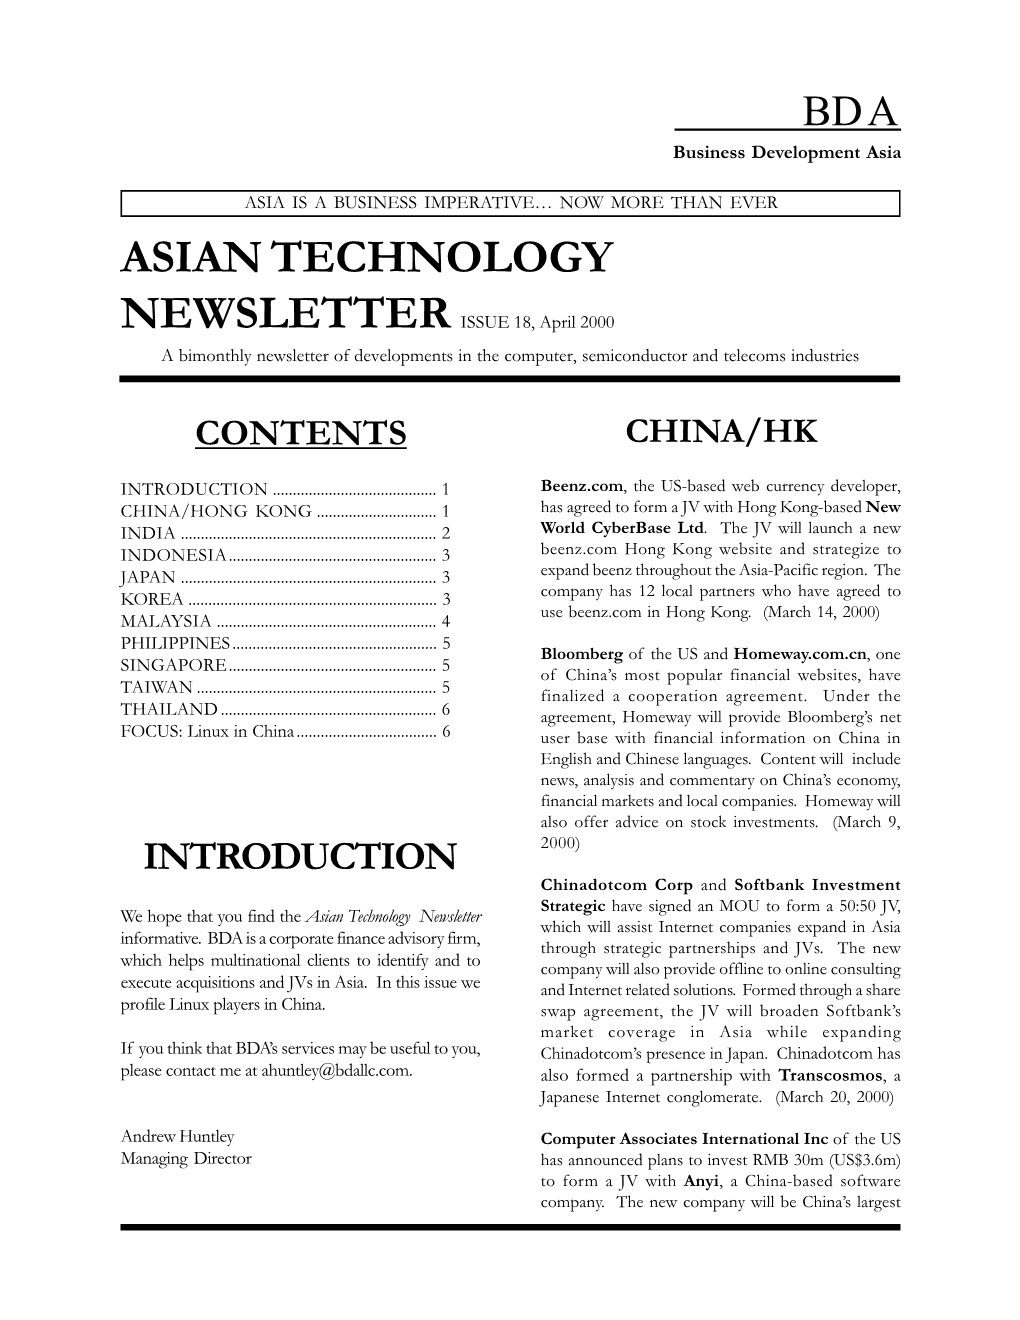 ASIAN TECHNOLOGY NEWSLETTER ISSUE 18, April 2000 a Bimonthly Newsletter of Developments in the Computer, Semiconductor and Telecoms Industries